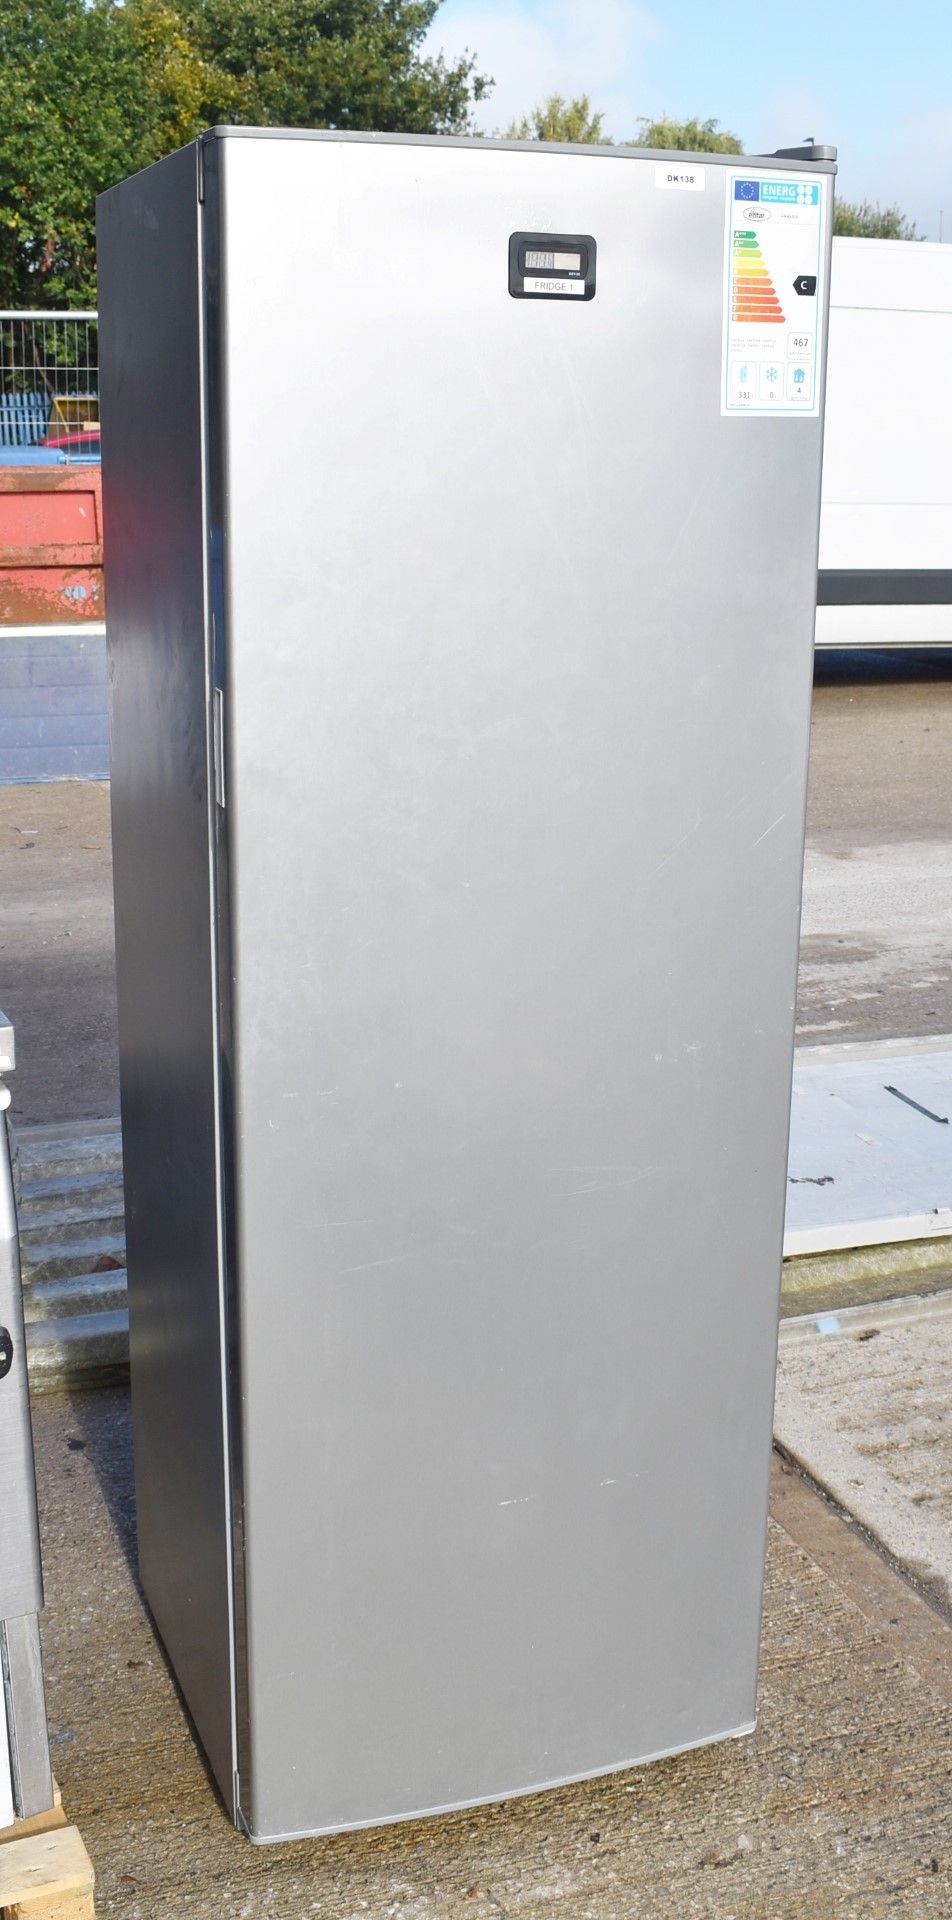 1 x Elstar Upright Commercial Refridgerator With Silver Finish - Model ARR350S - Image 5 of 8